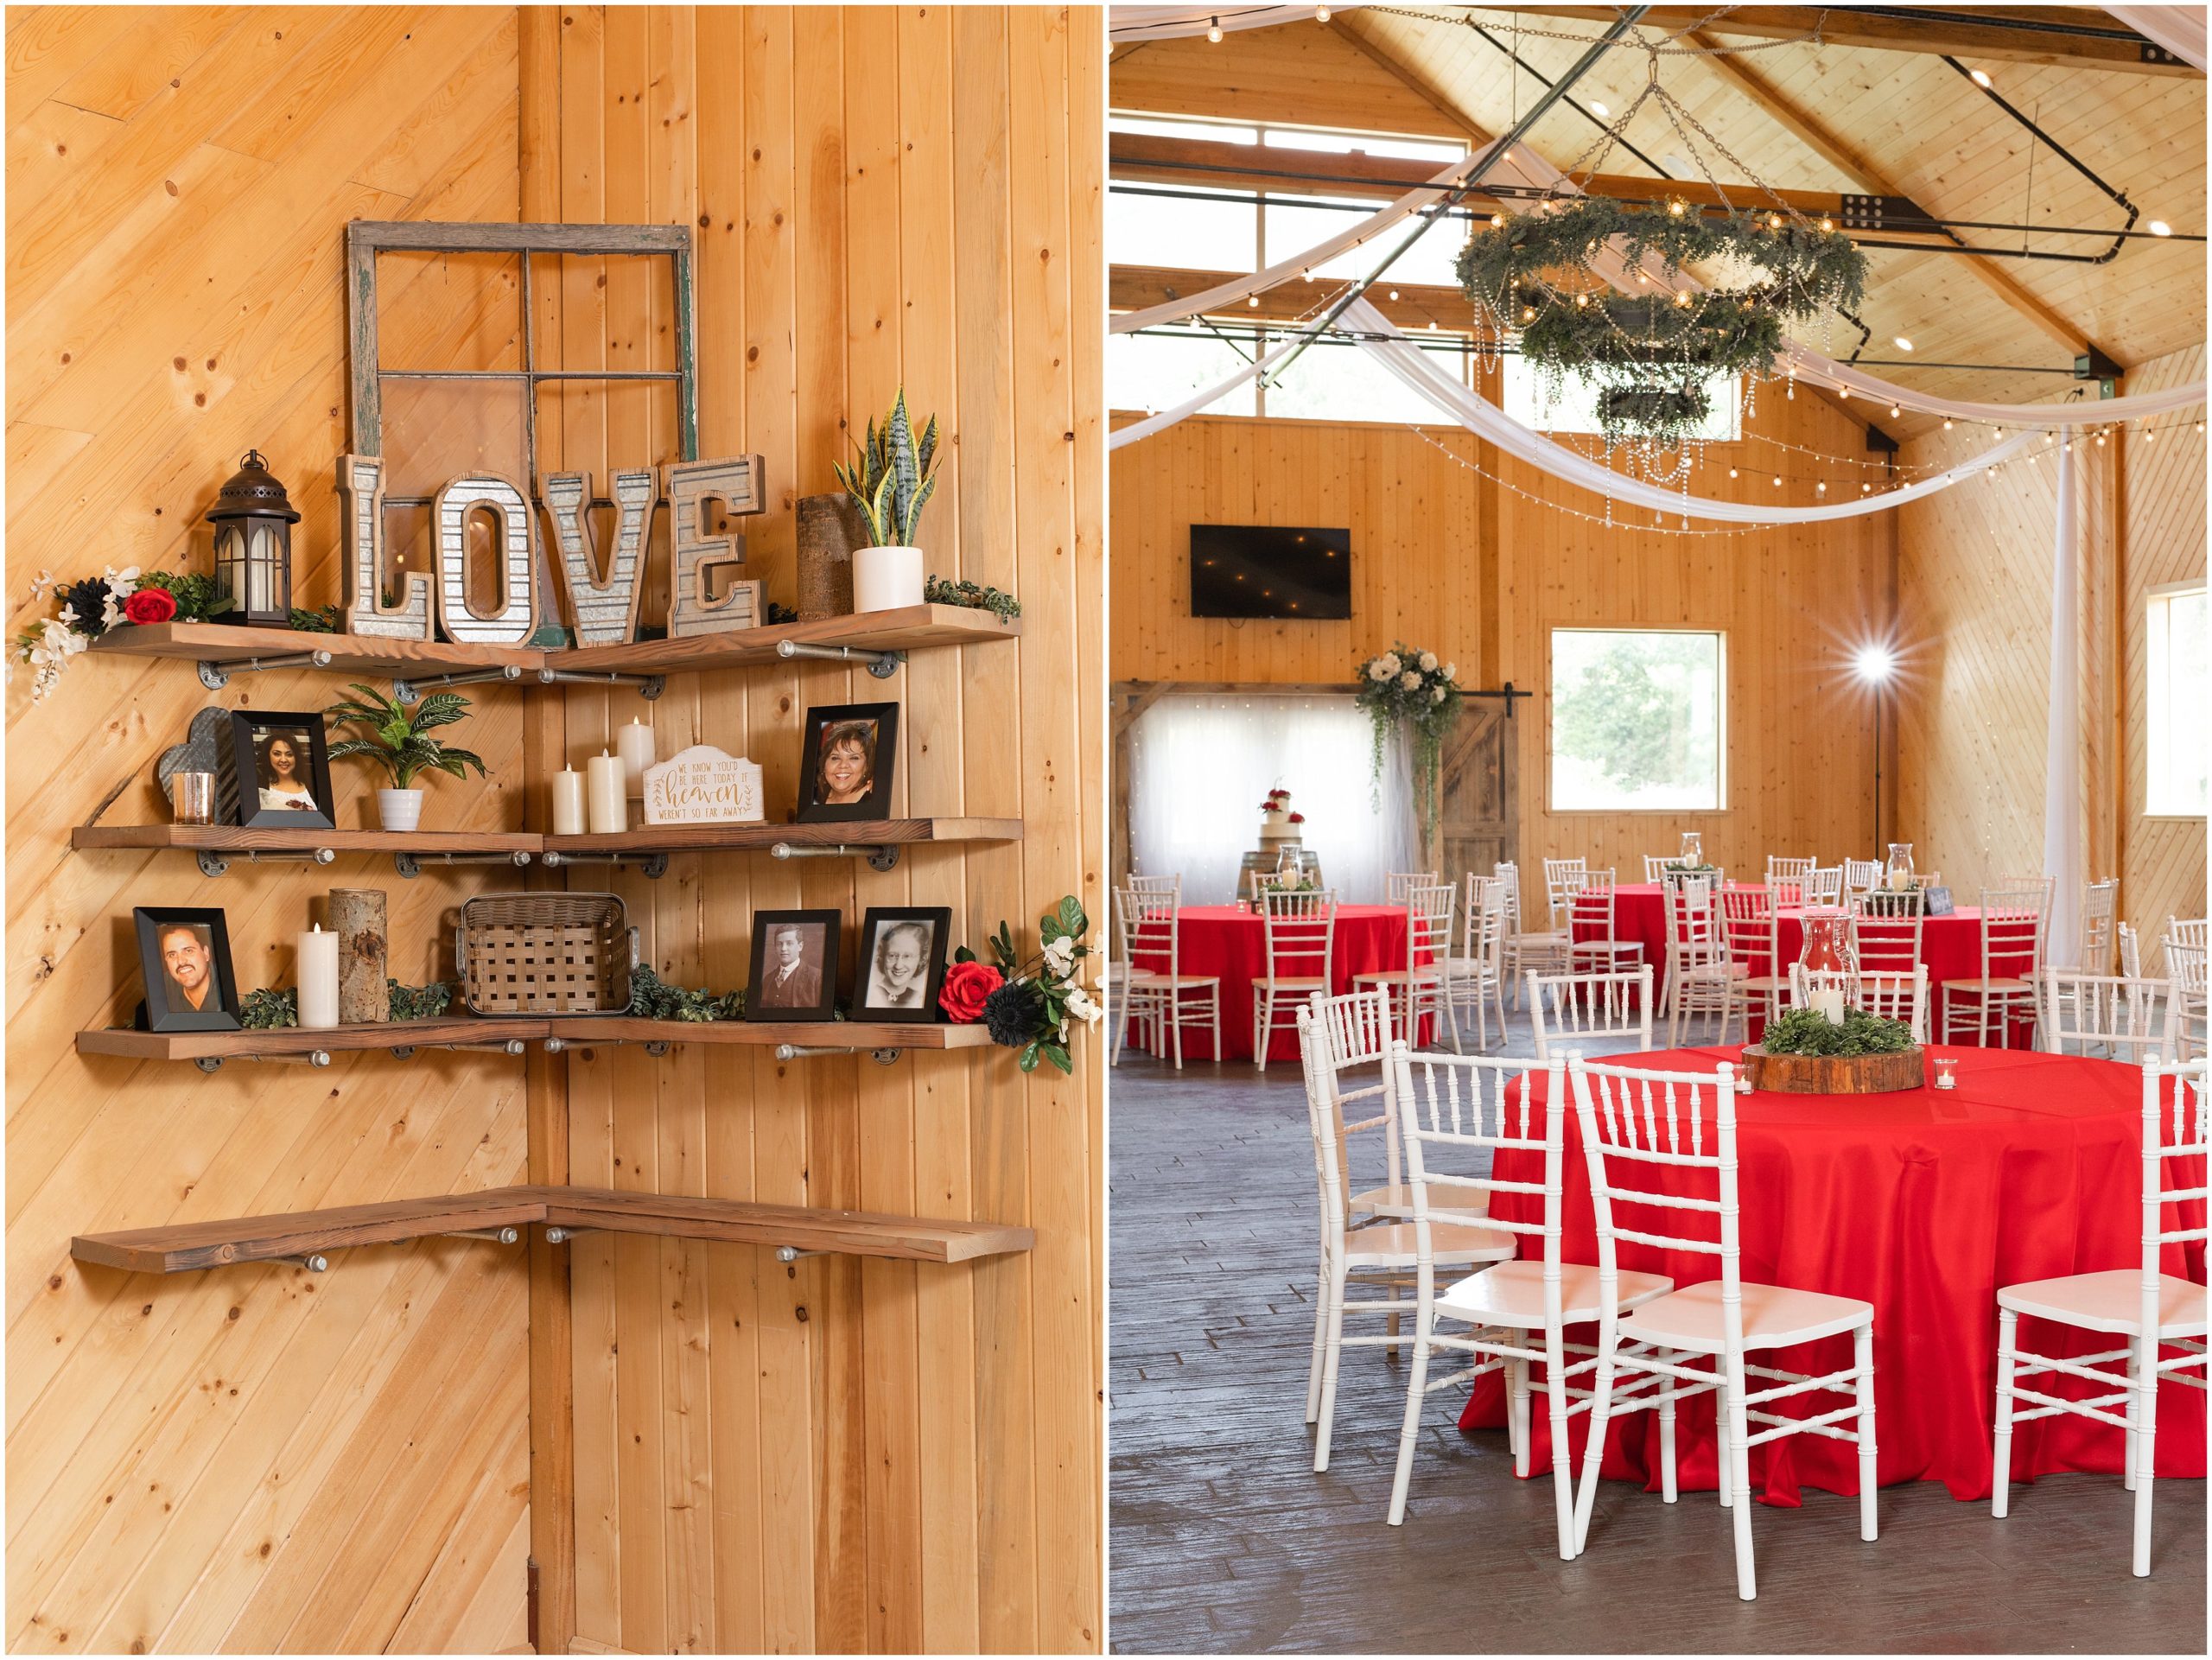 Cake and table setup inside barn | Red and Black Oak Hills Utah Spring Wedding | Jessie and Dallin Photography